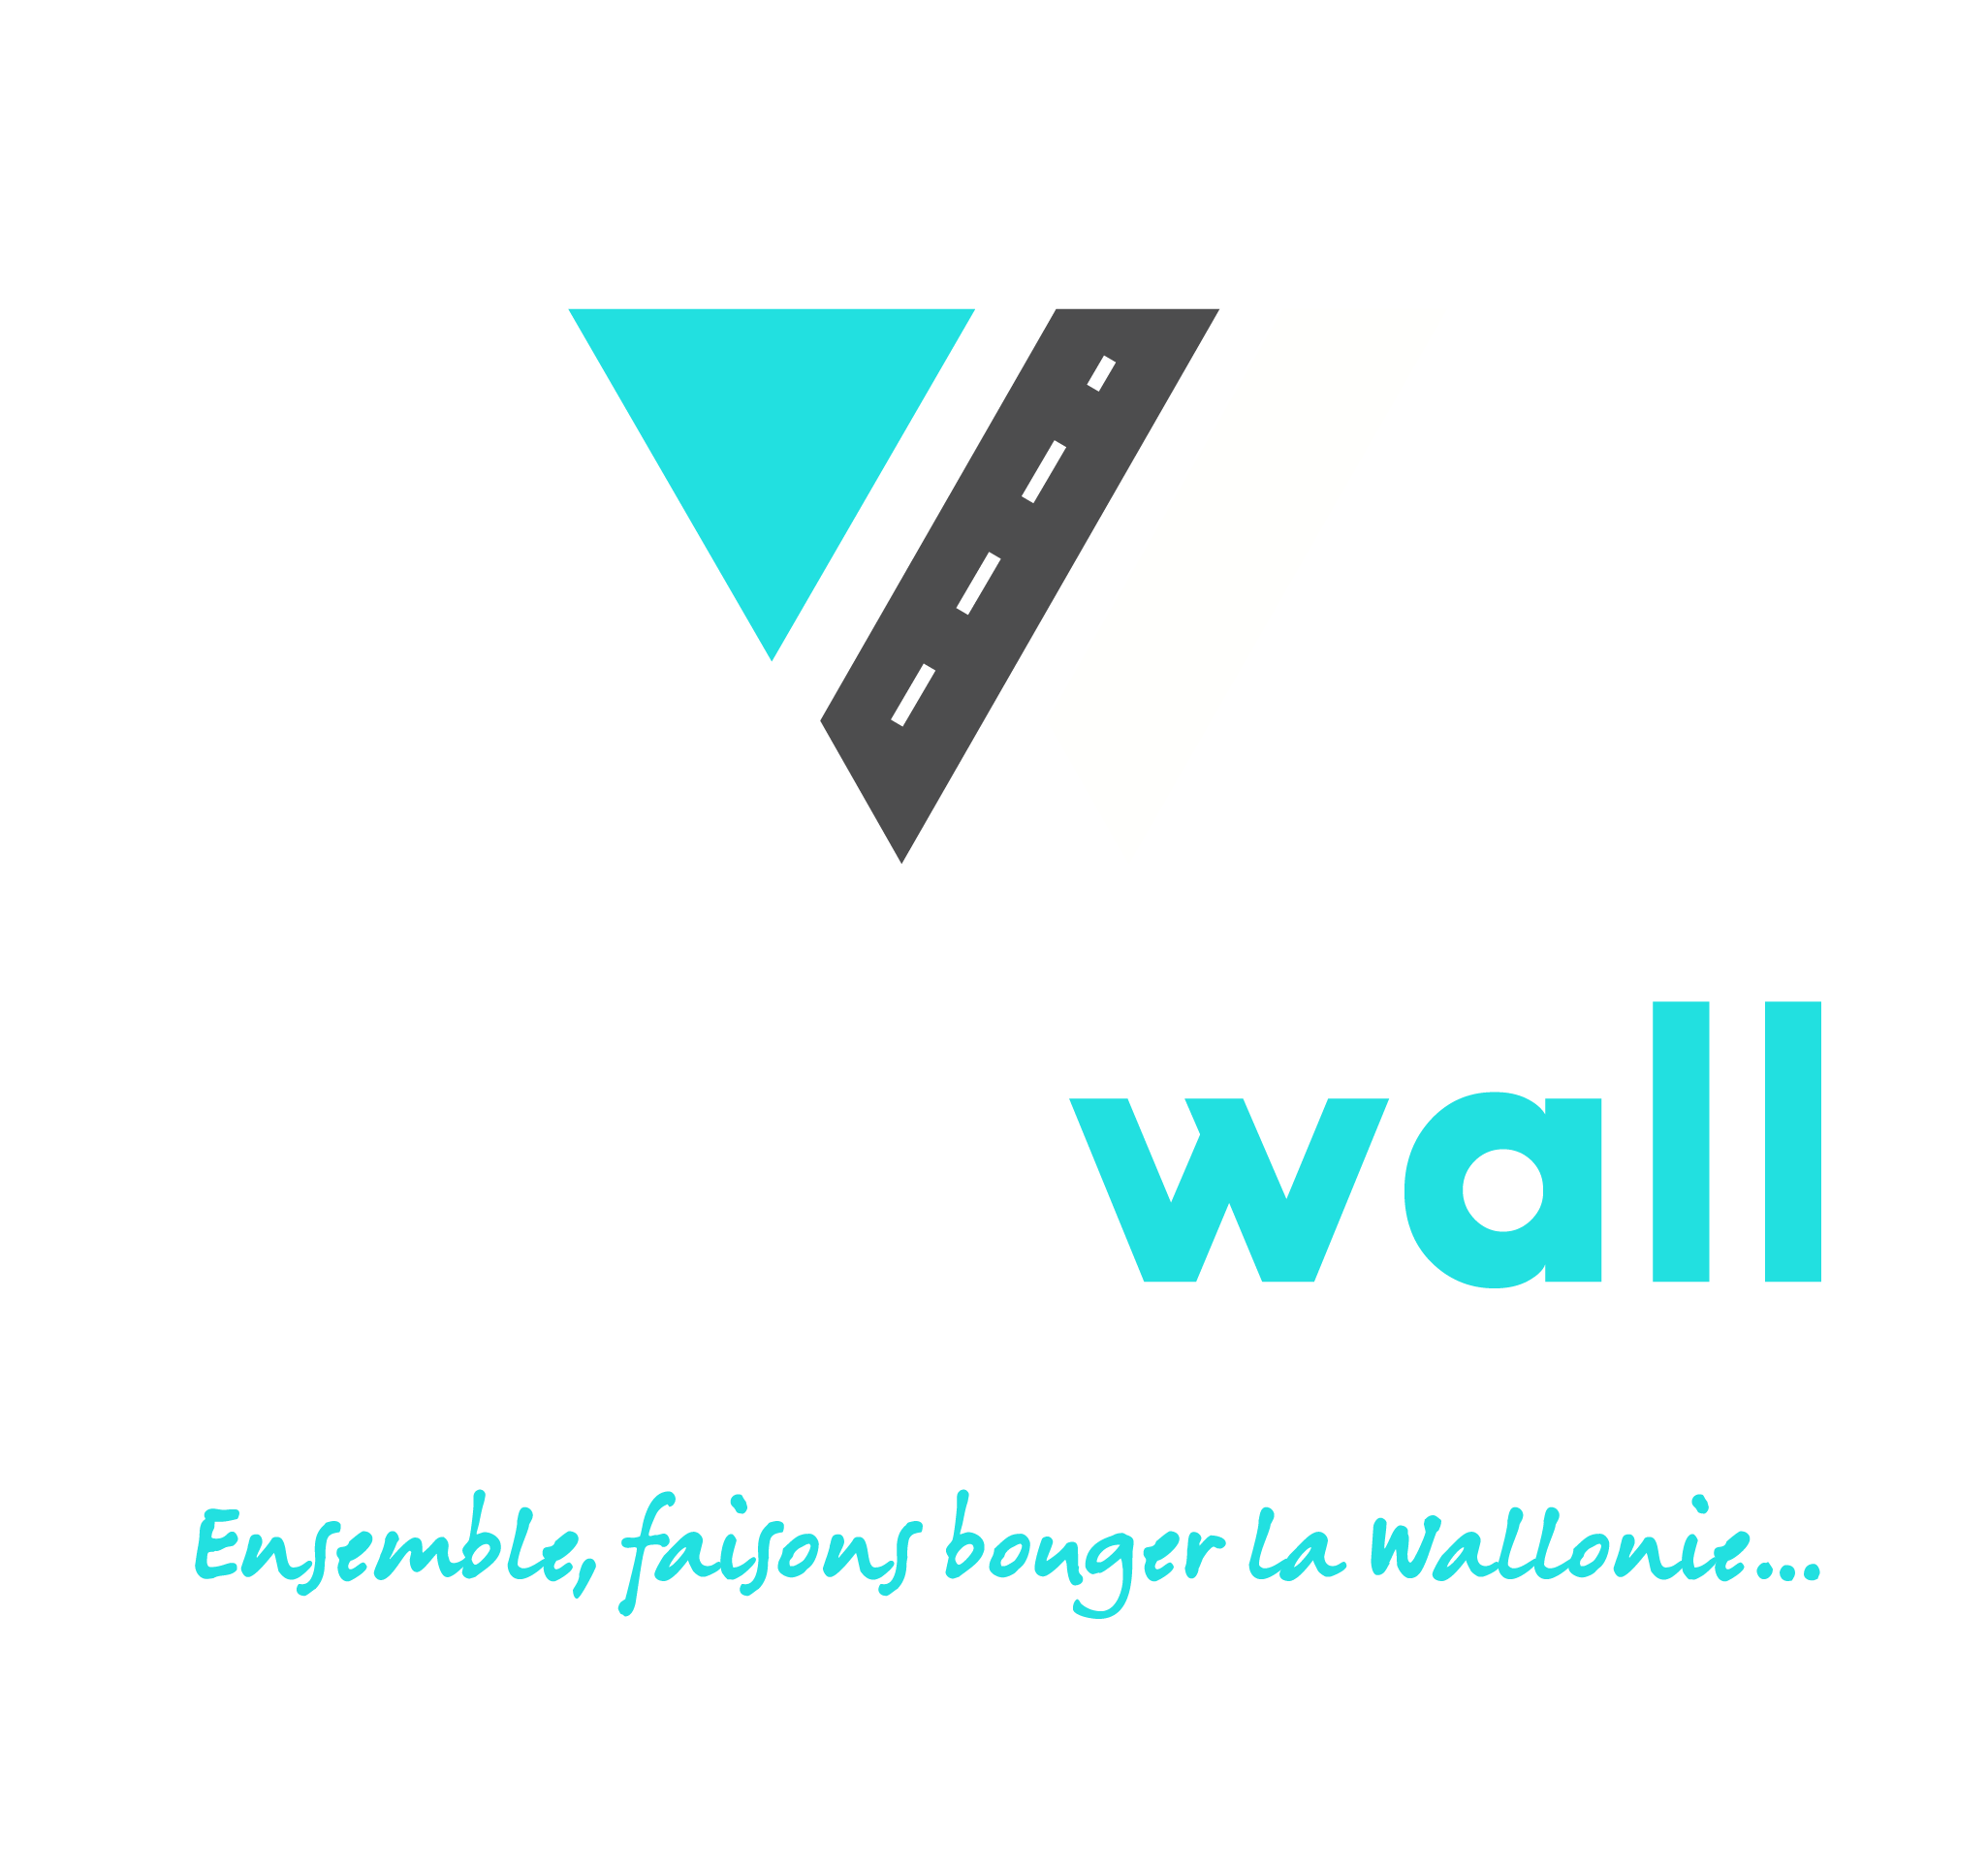 MOBIWALL